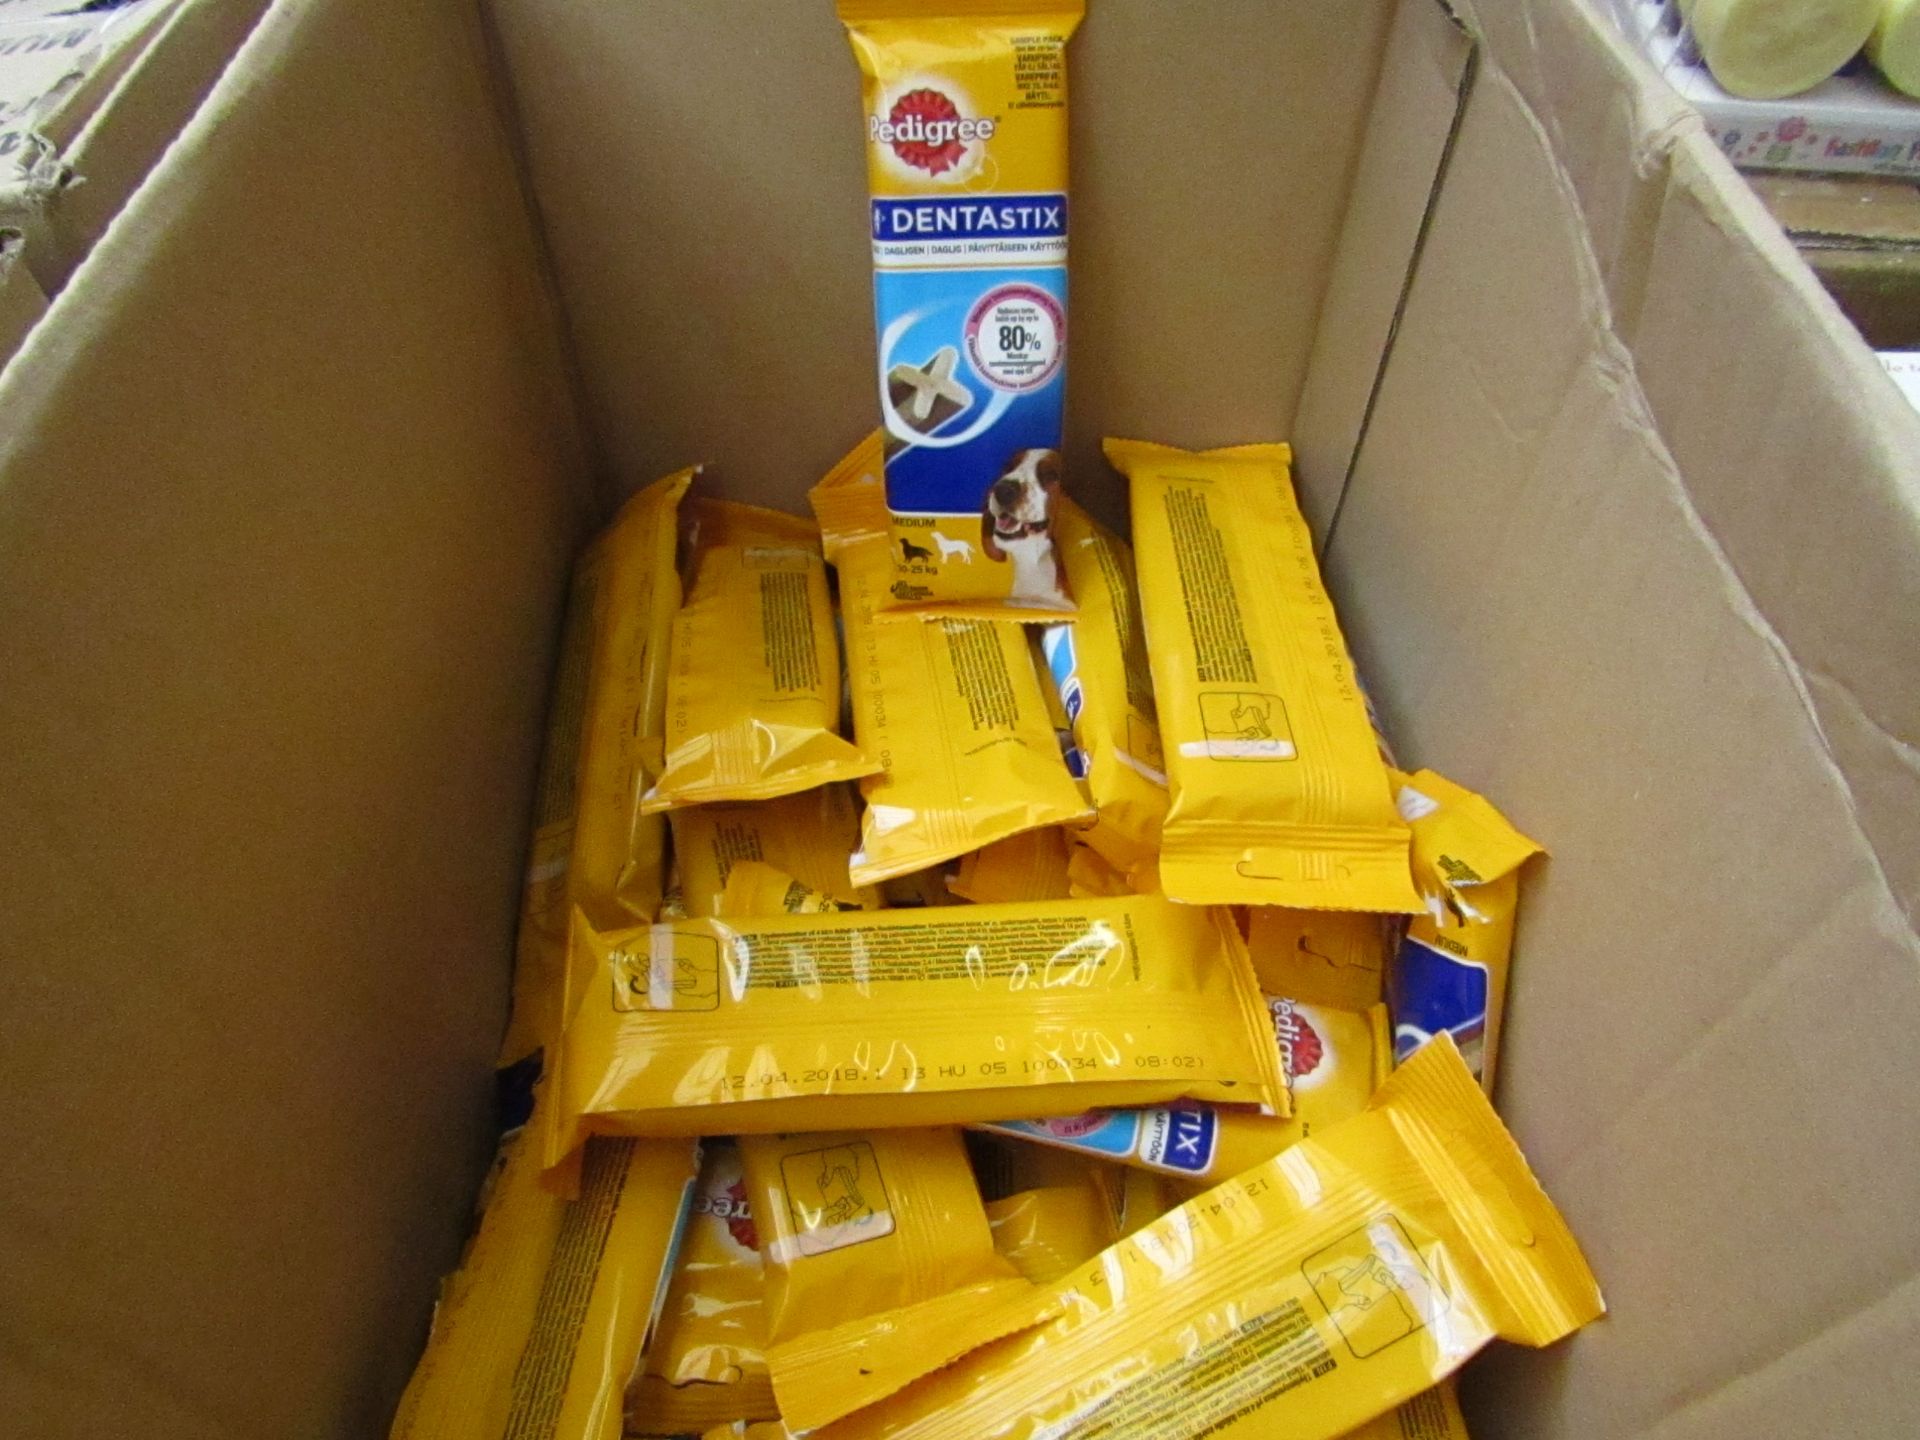 20x packets of Pedigree Dentastix, each pack contains 3. (BB: 12/04/18)